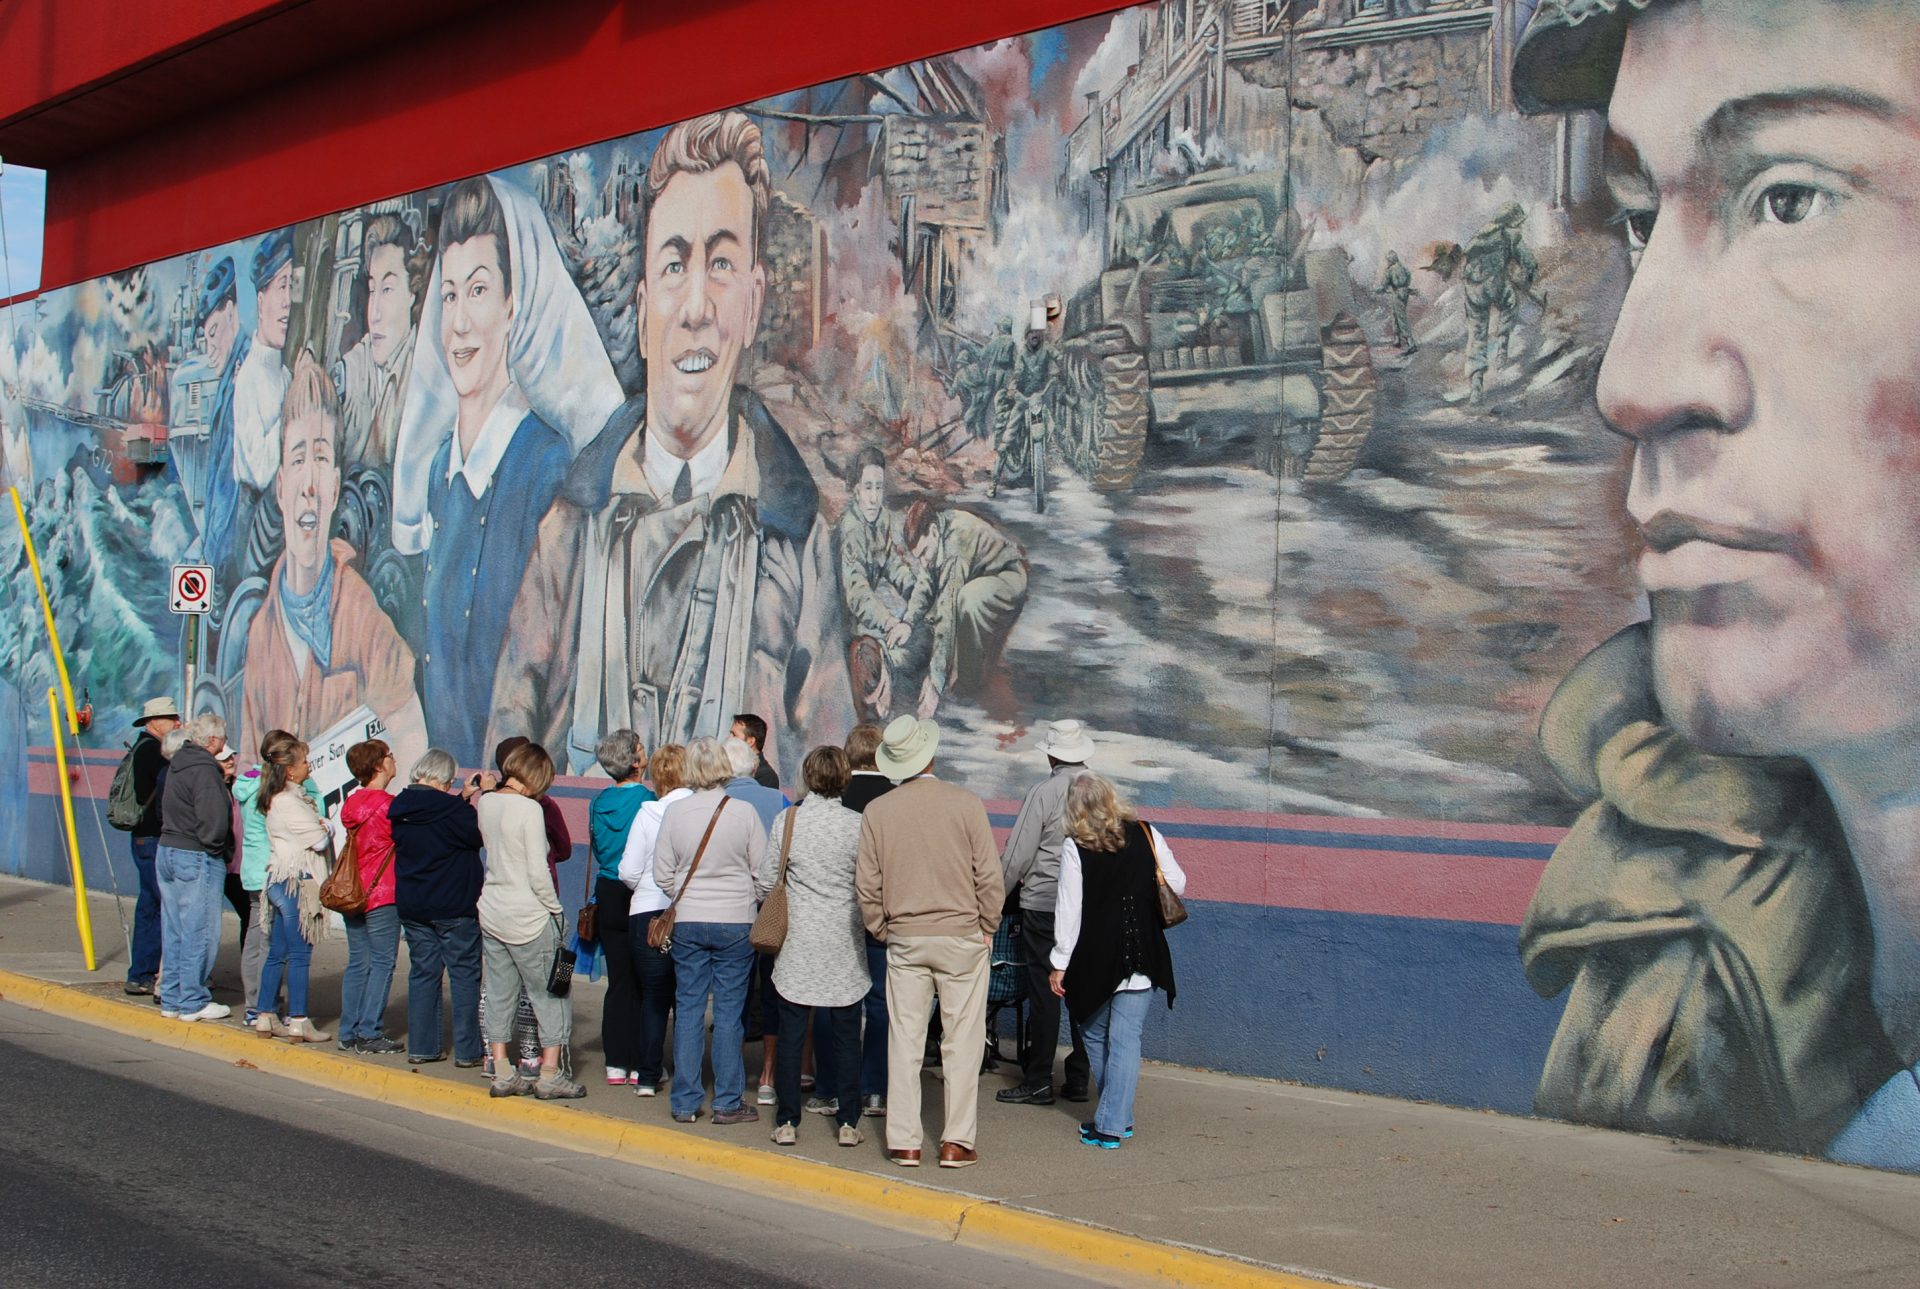 Historic Downtown Mural Tours